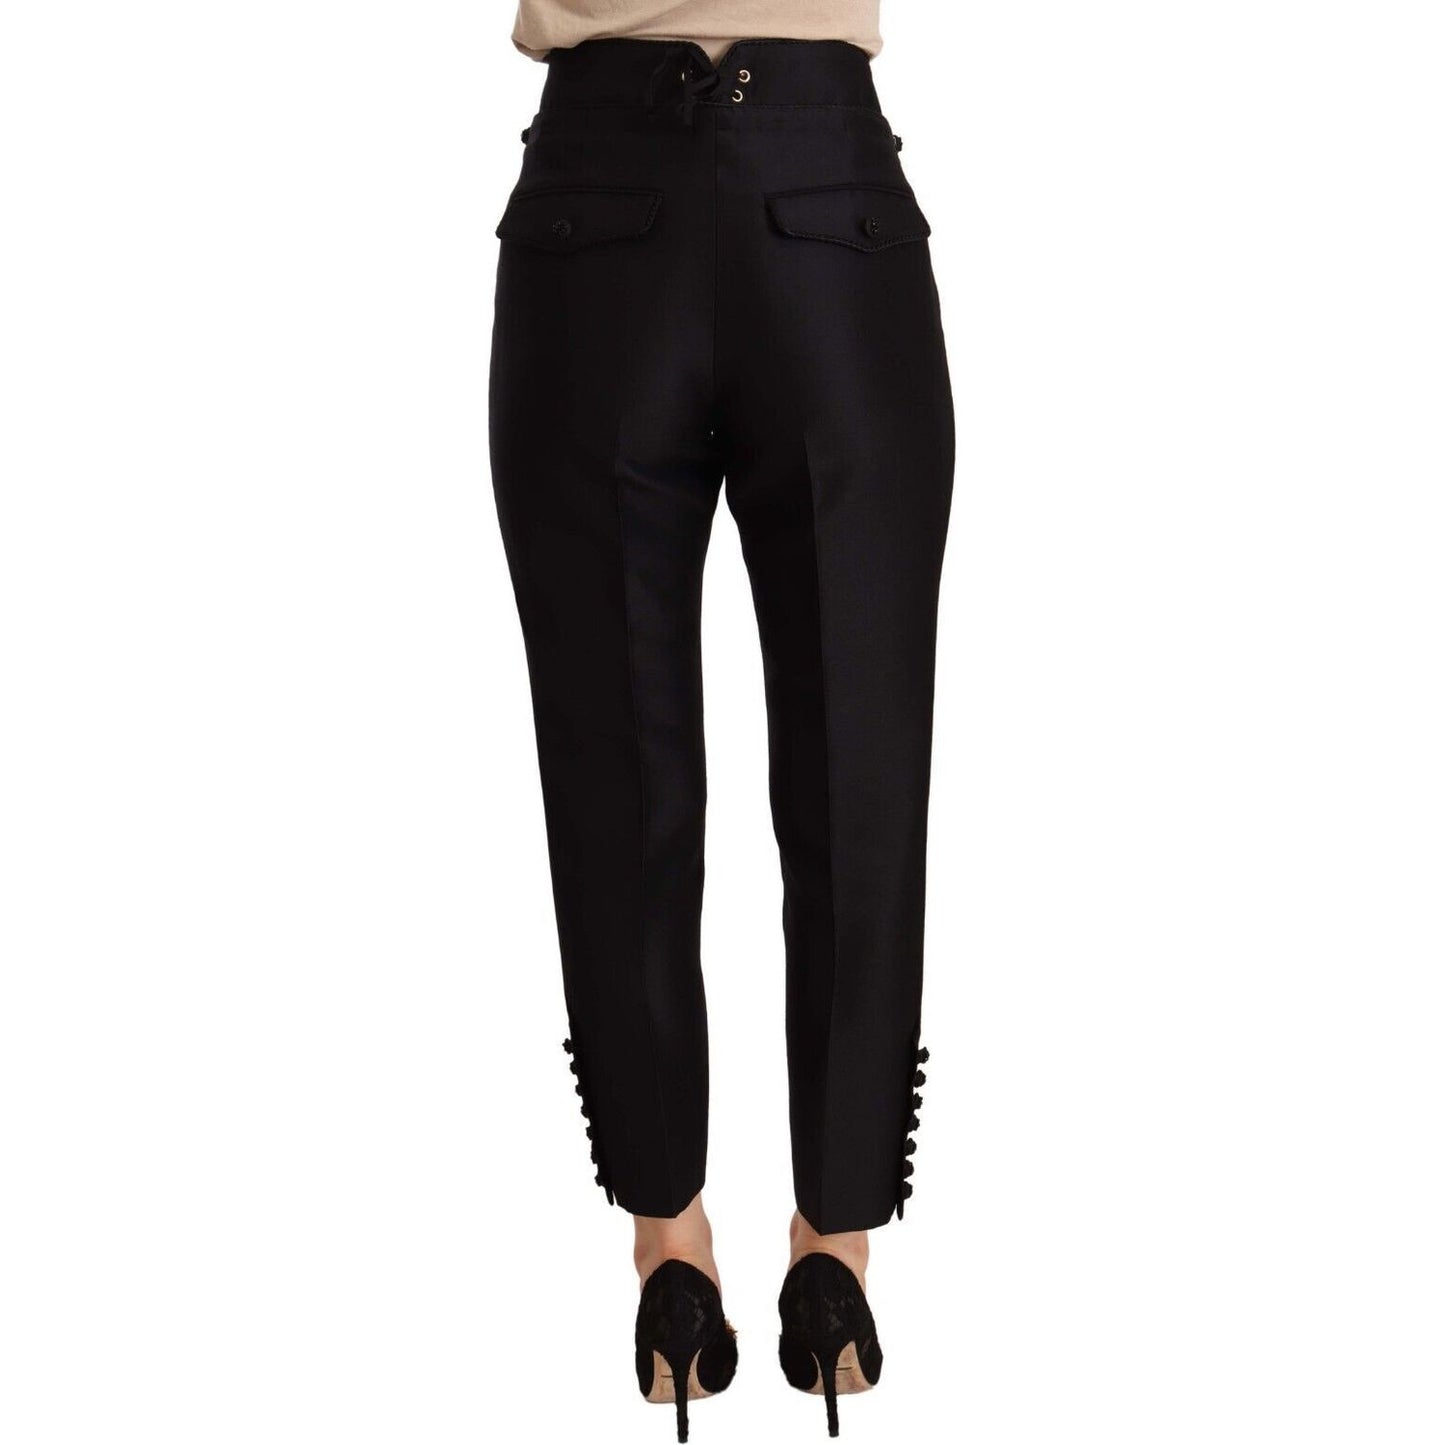 Dsquared² Chic High-Waist Cropped Trousers black-button-embellished-cropped-high-waist-pants s-l1600-2-114-c942ec59-ab2.jpg